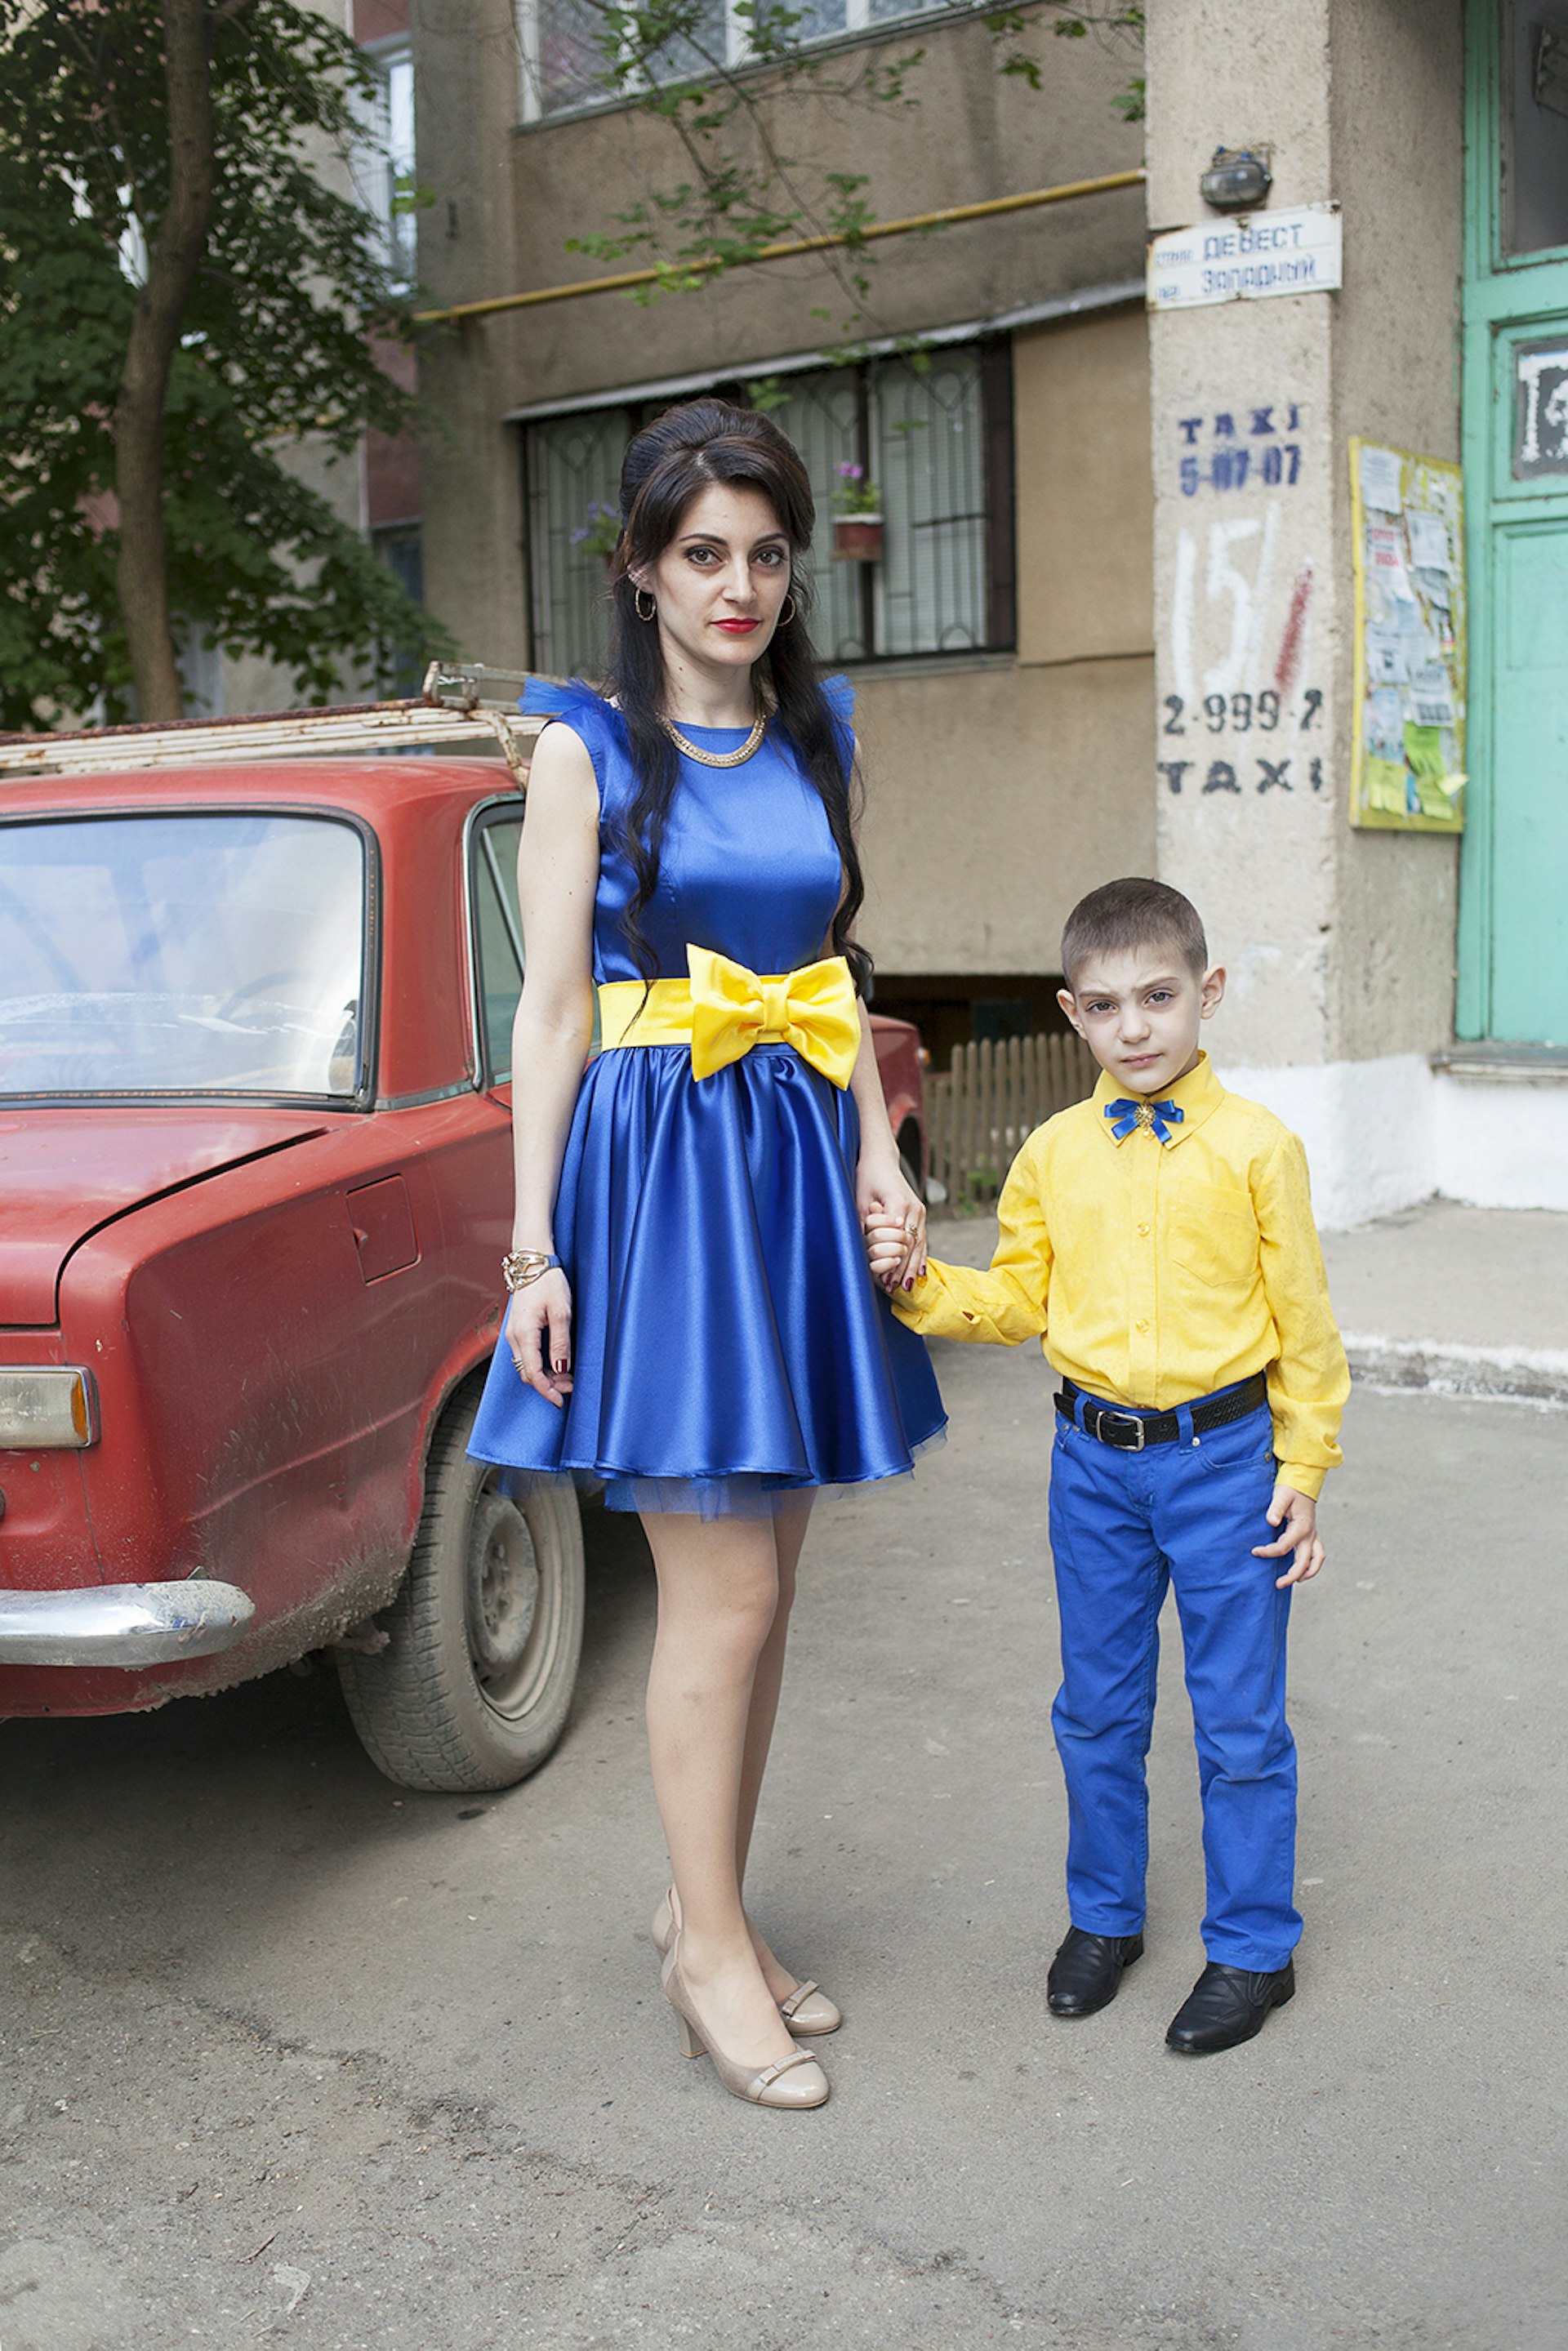 Ukrainian woman and her son